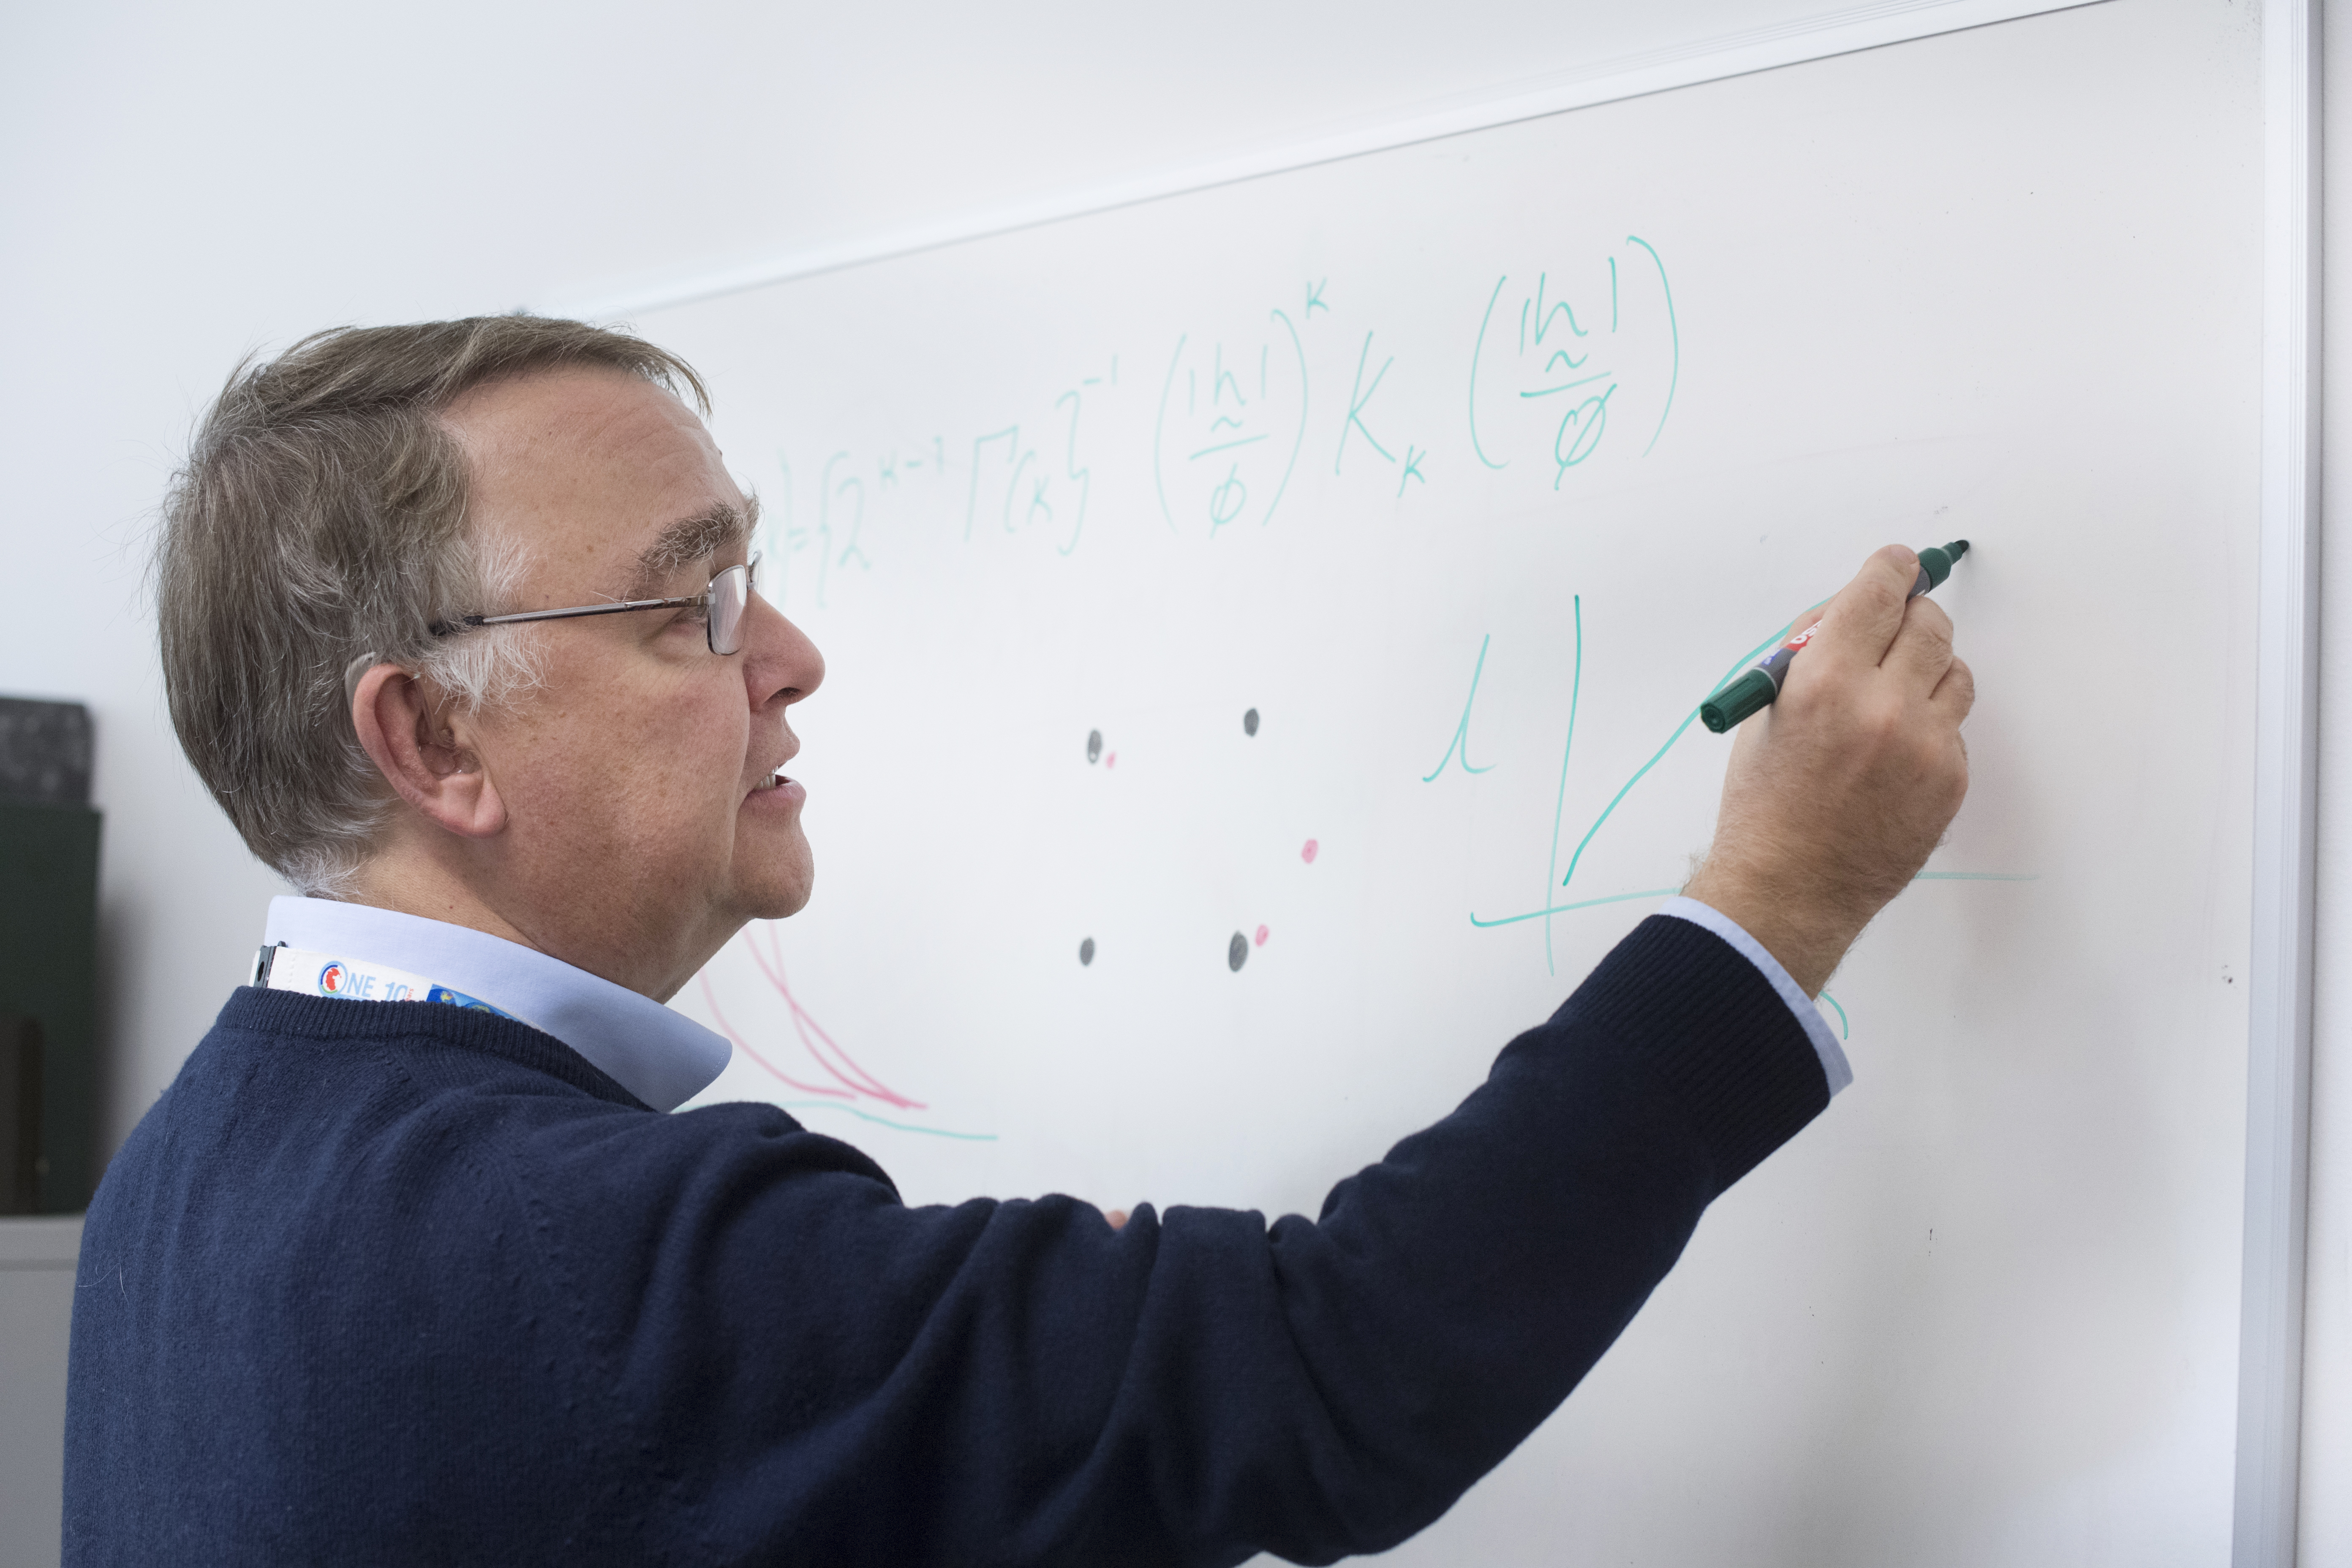 A researcher in a blue jersey writing on a white board